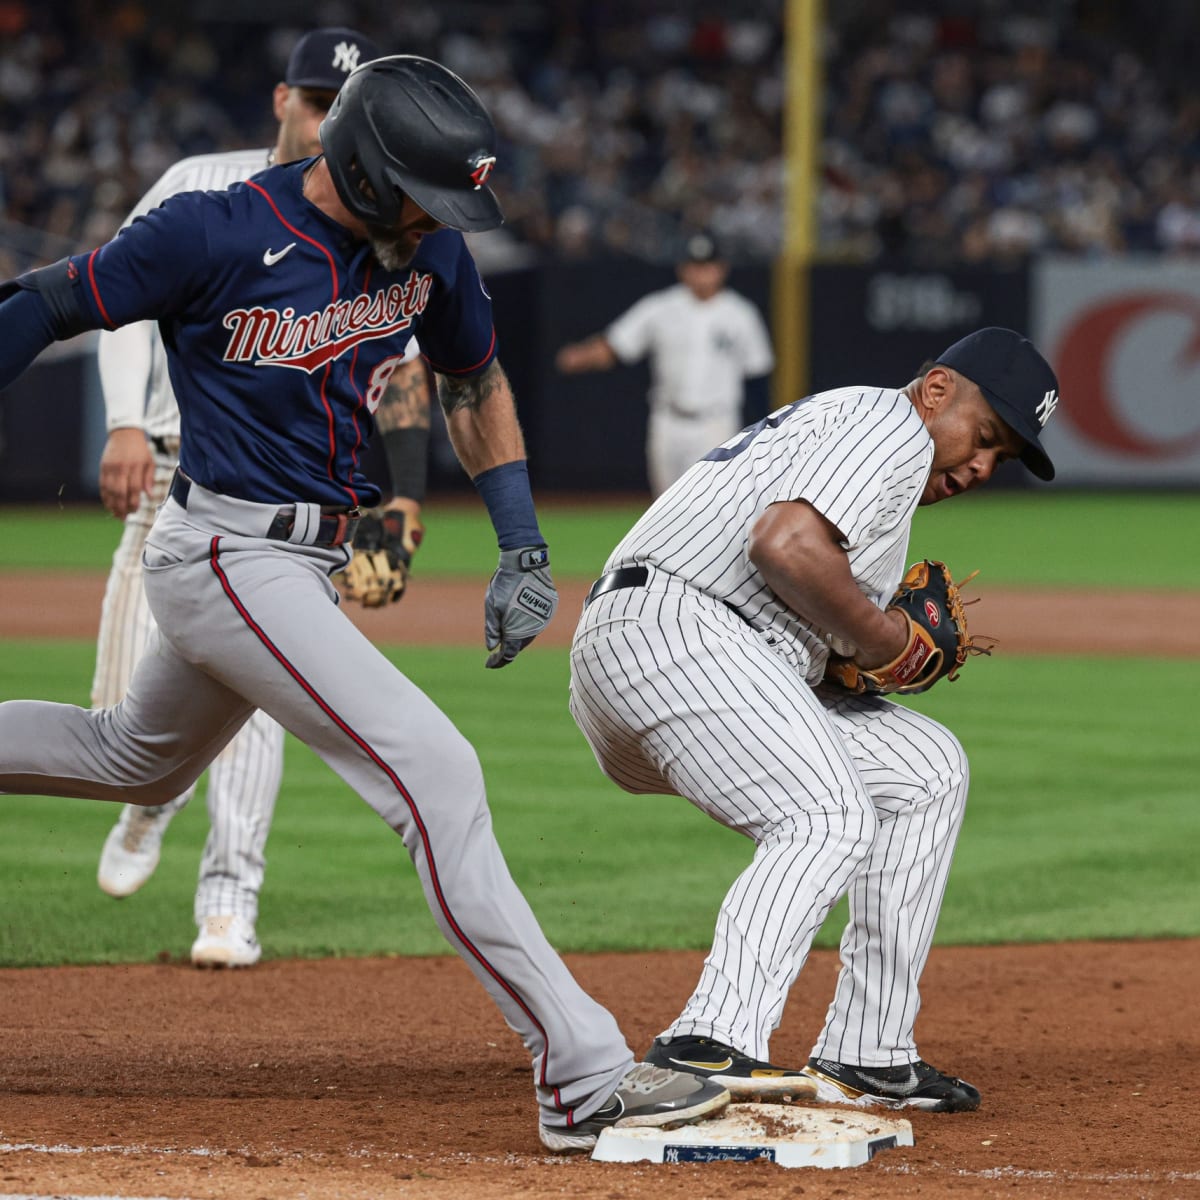 Yankees again power their way to victory over the Twins